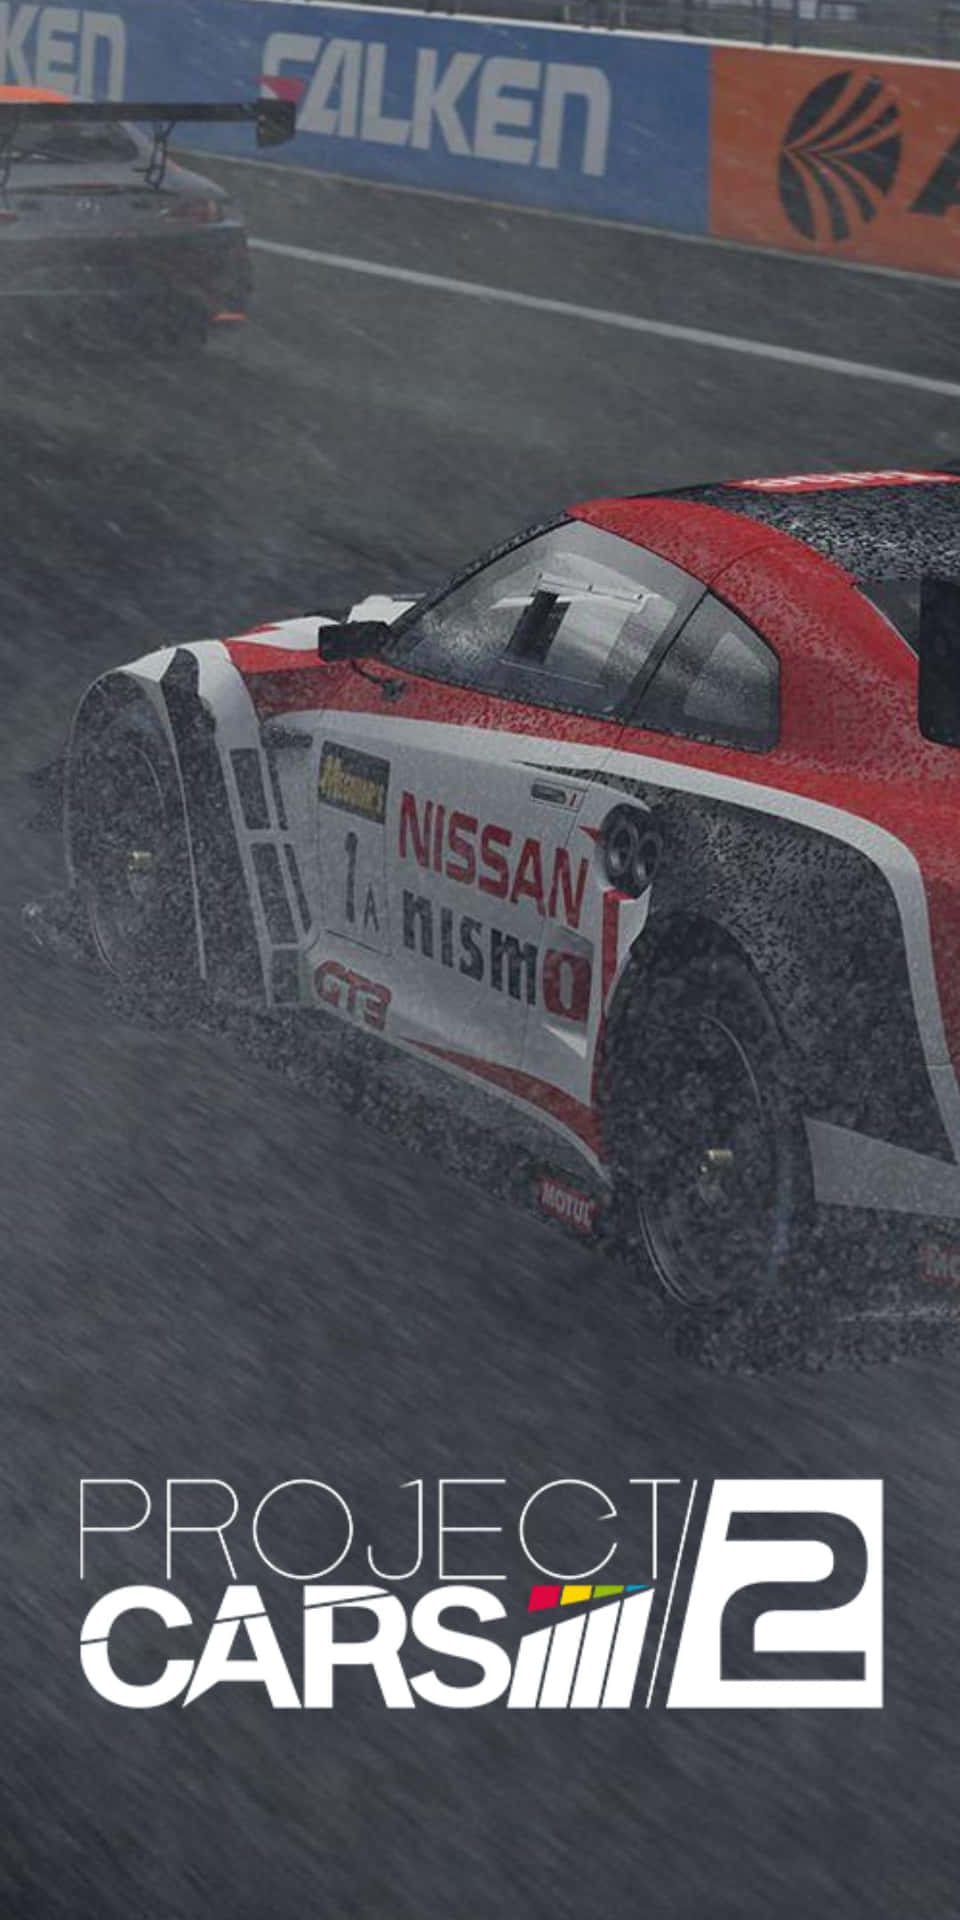 2016 Nissan Gt-r Pixel 3 Project Cars 2 Background